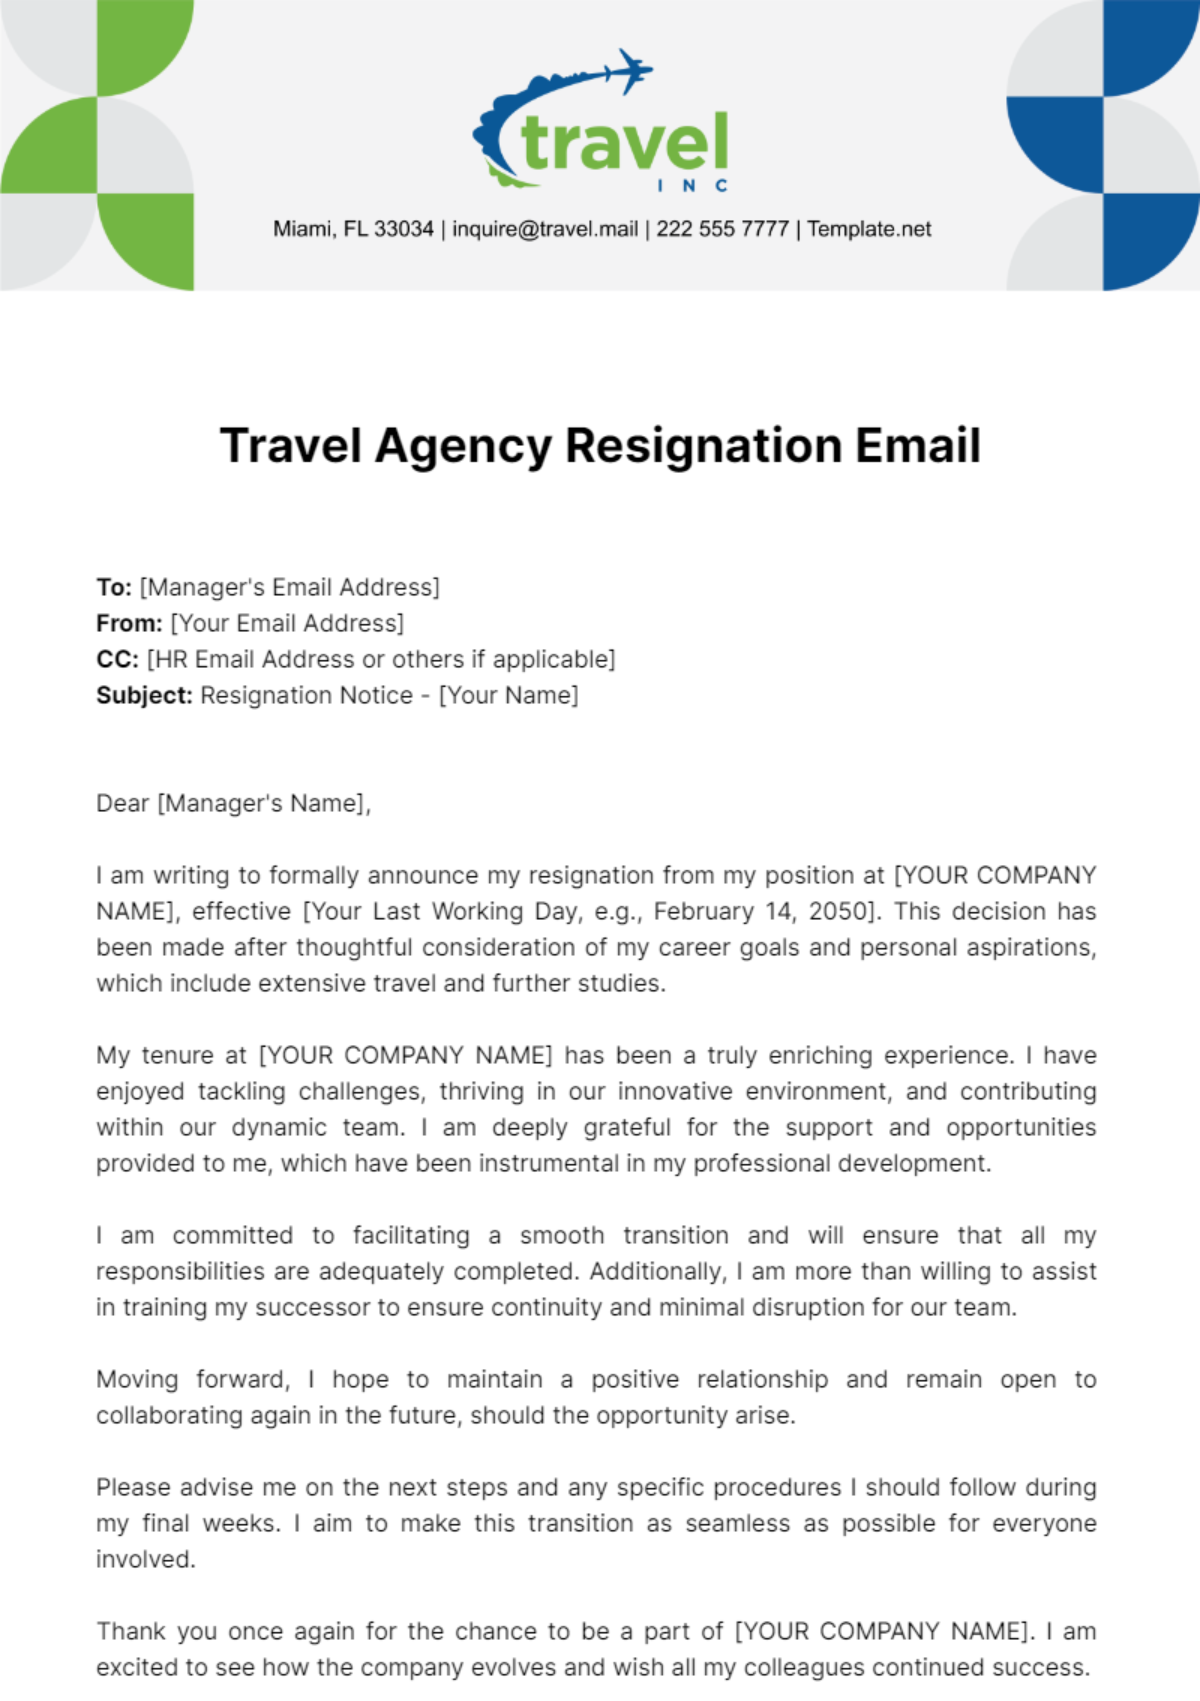 Free Travel Agency Resignation Email Template